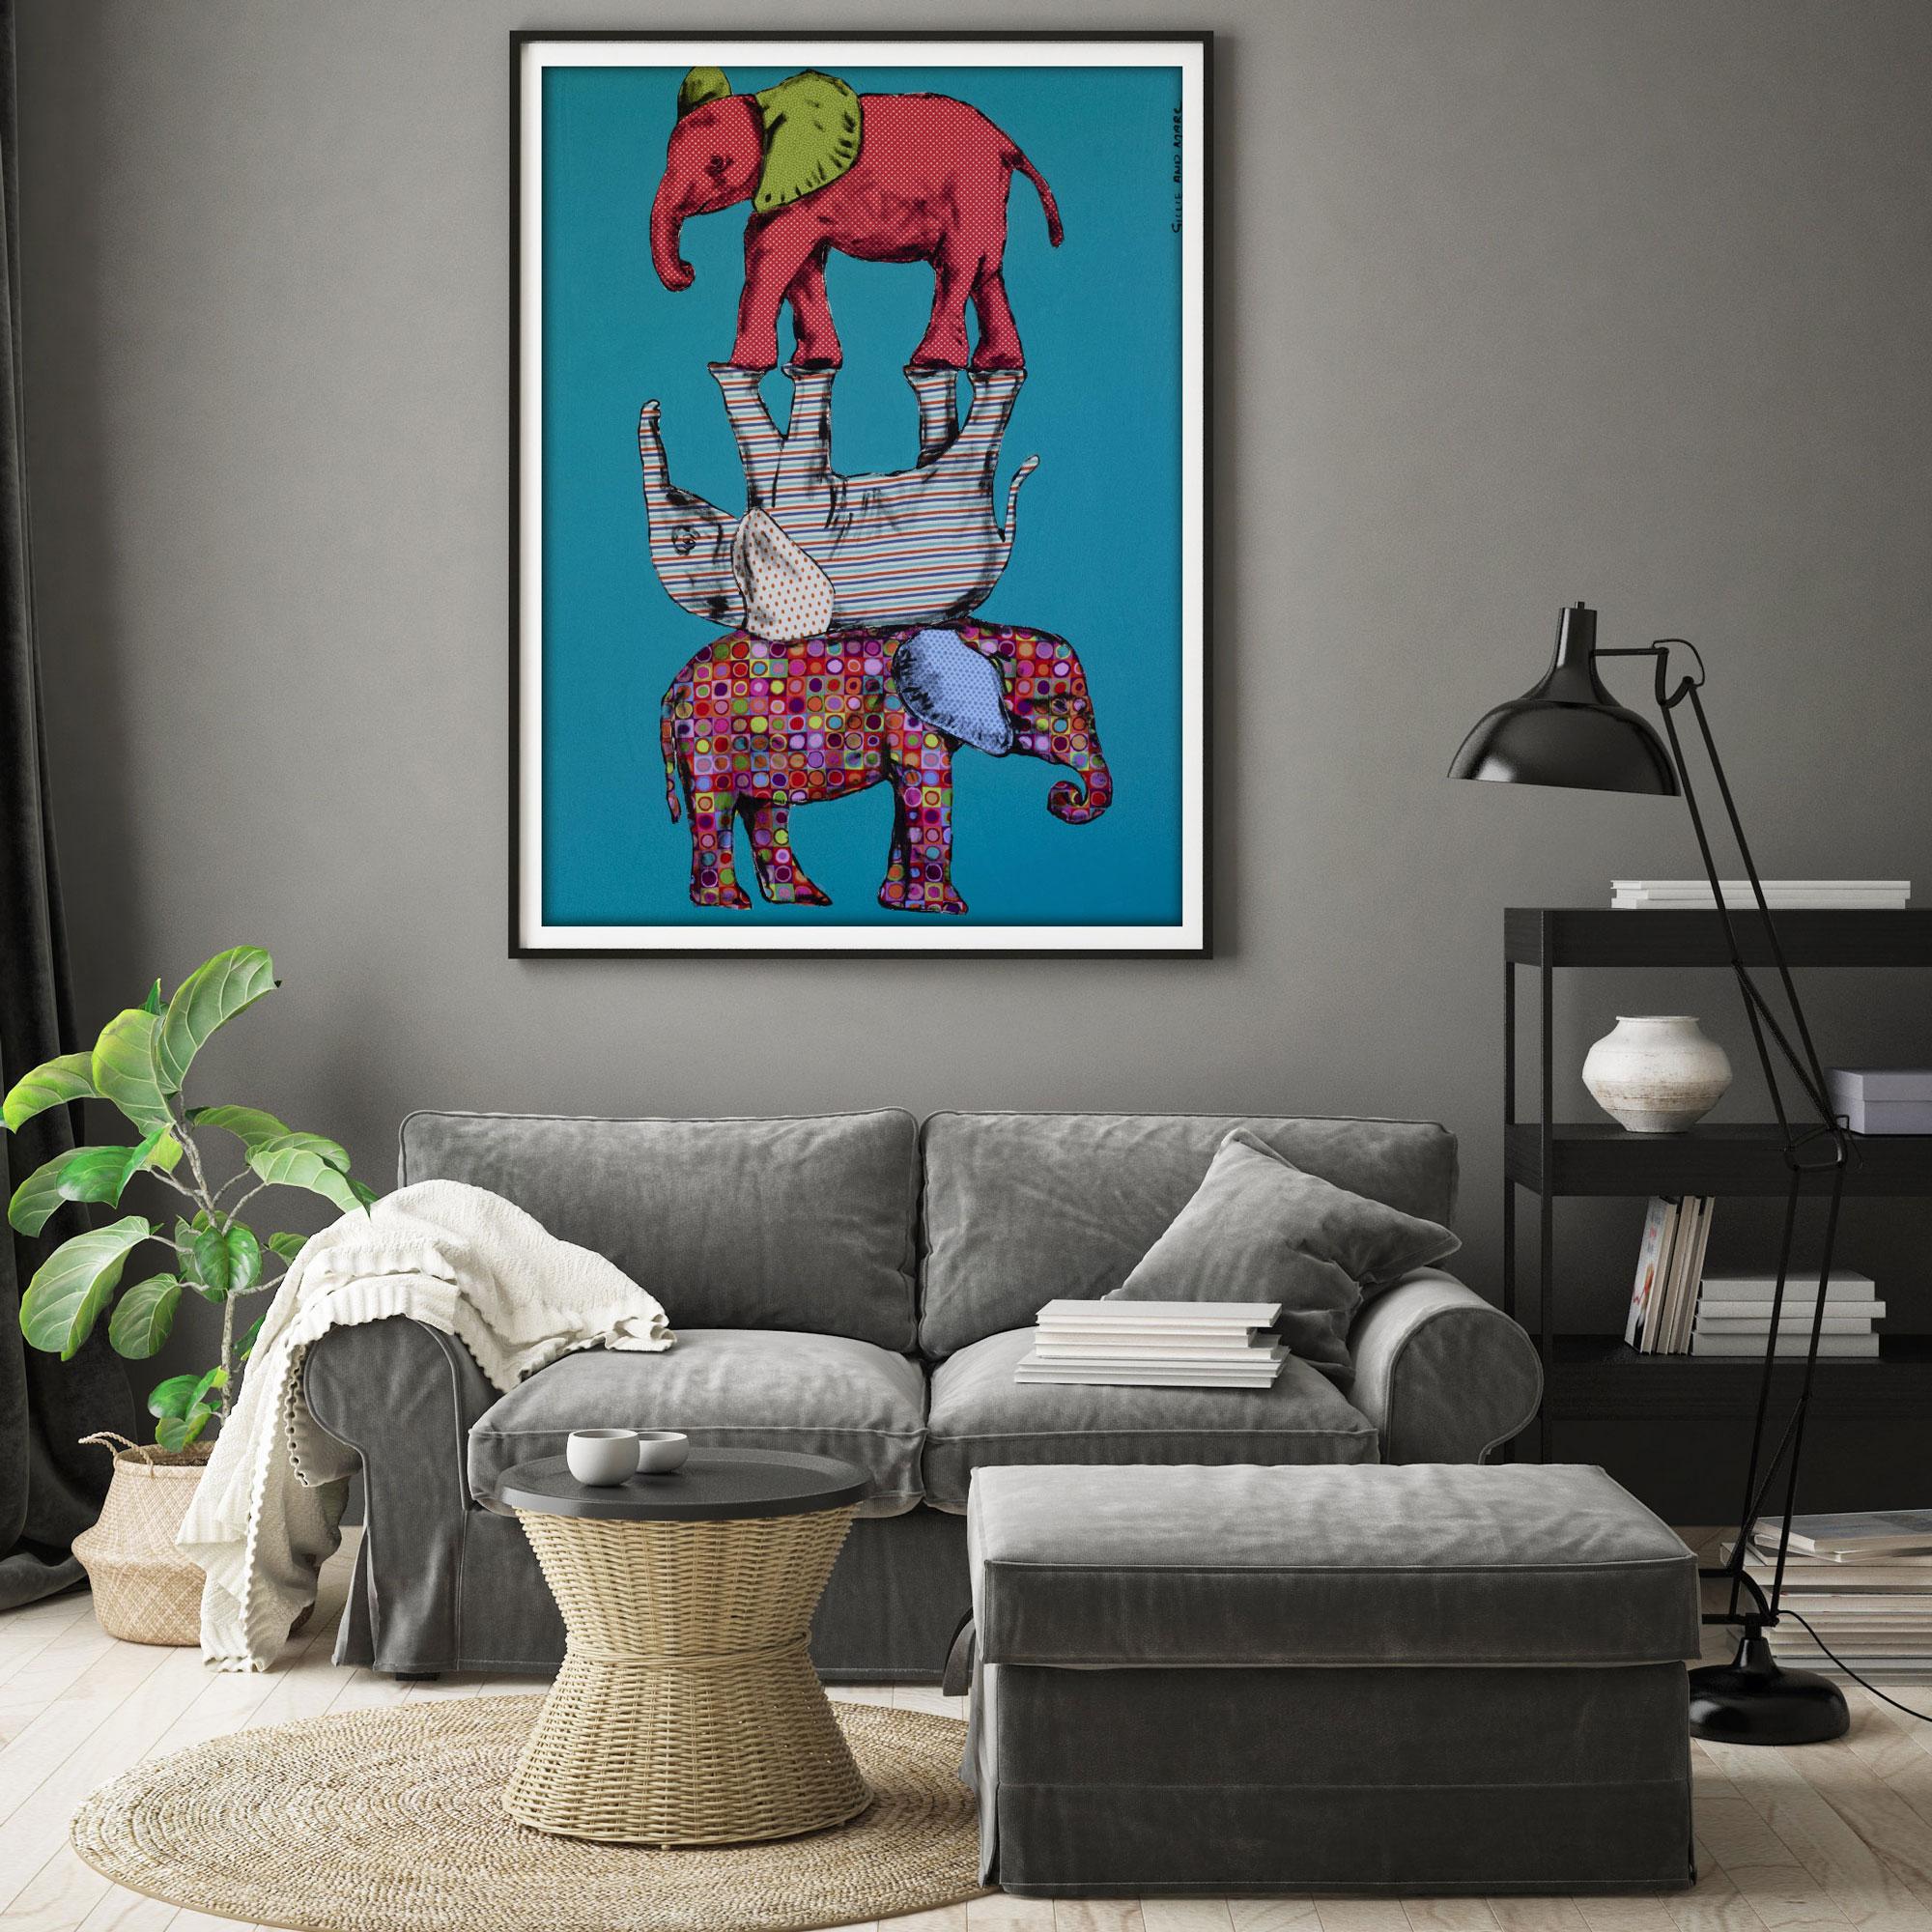 Animal Print - Gillie and Marc - Art - Limited Edition - Wildlife - Elephant - Blue Portrait Painting by Gillie and Marc Schattner